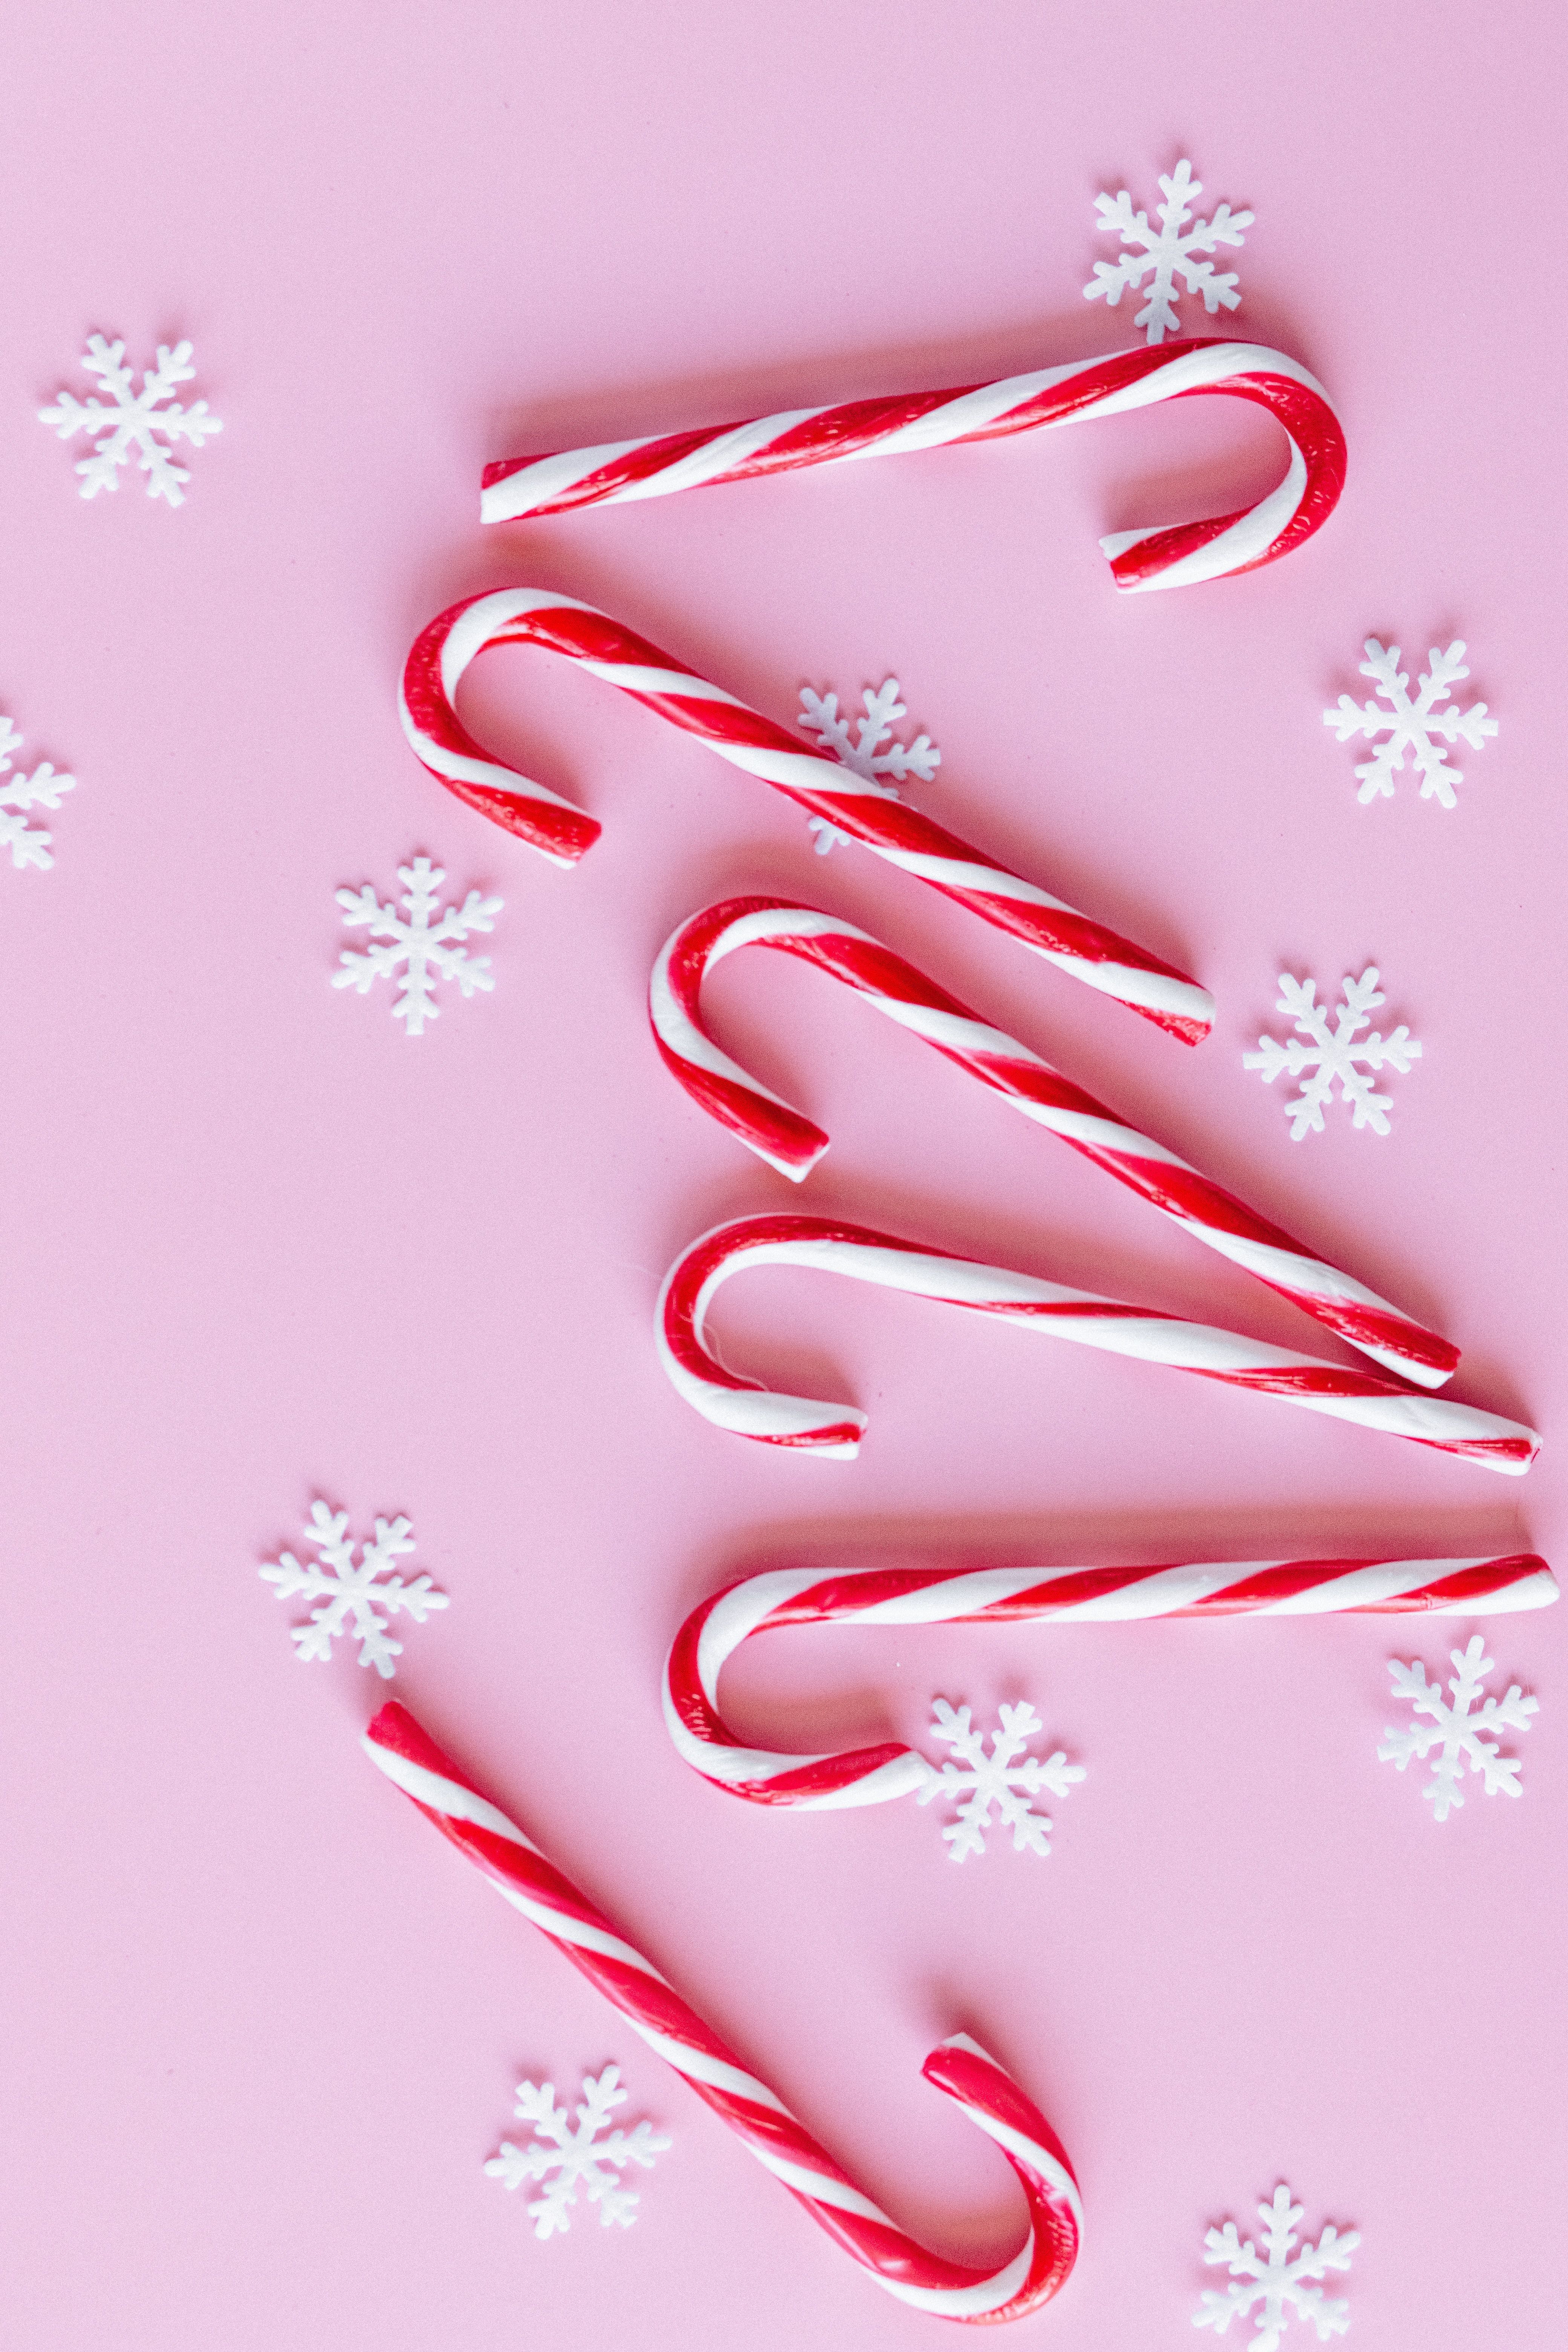 White and Red Candy Canes on Pink Background · Free